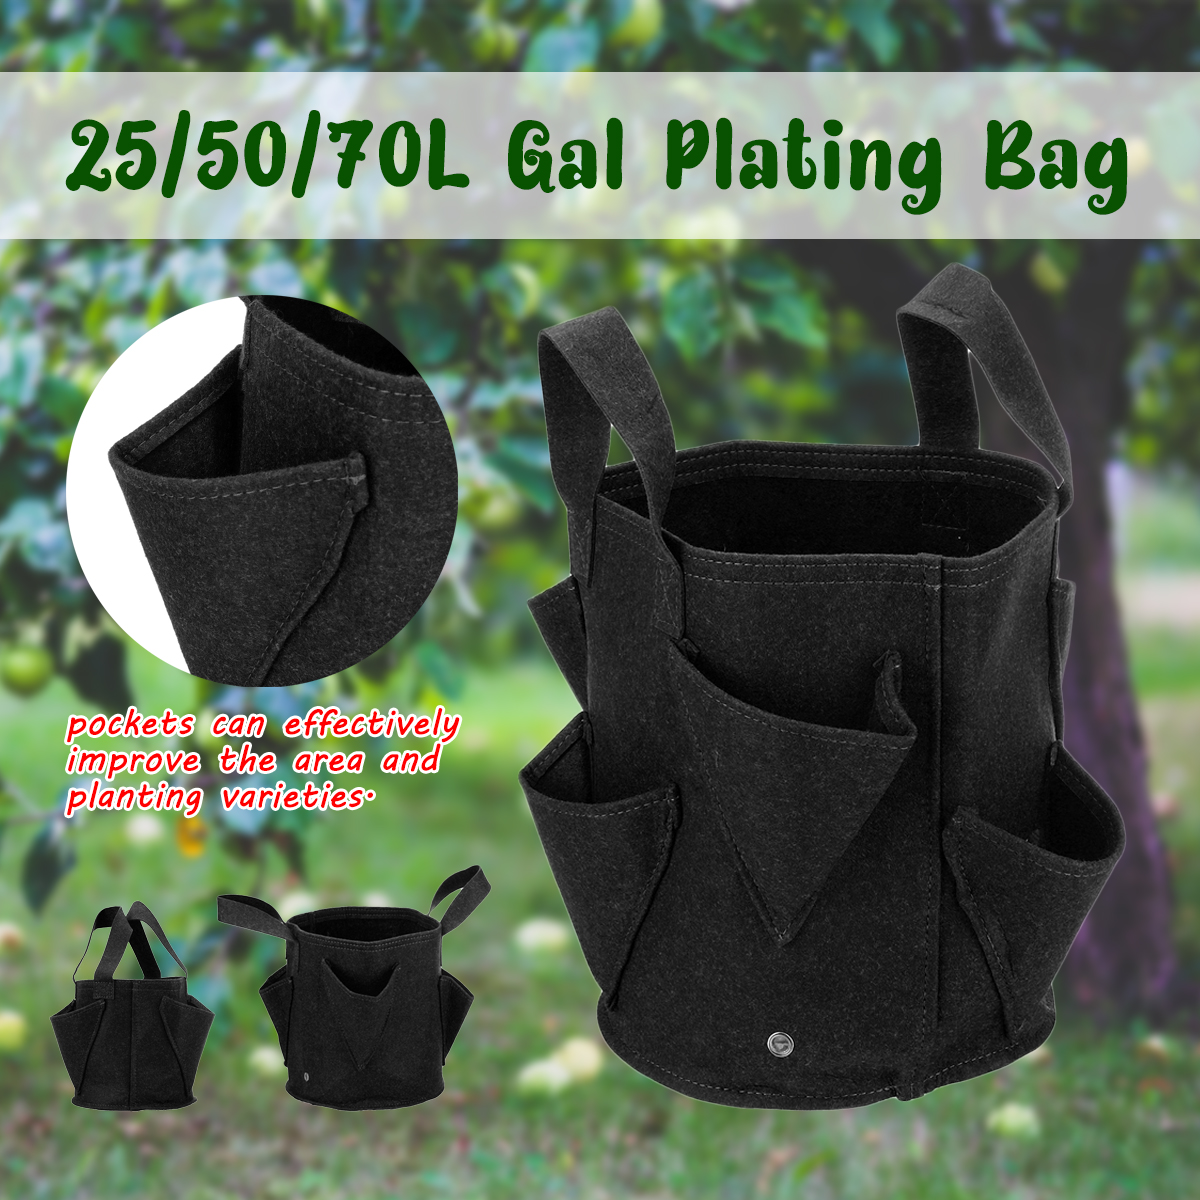 2mm-Ultra-Thick-Black-Round-Planting-Container-Non-Woven-Felt-Planter-Pot-Grow-Bags-Plants-Nursery-S-1544992-2